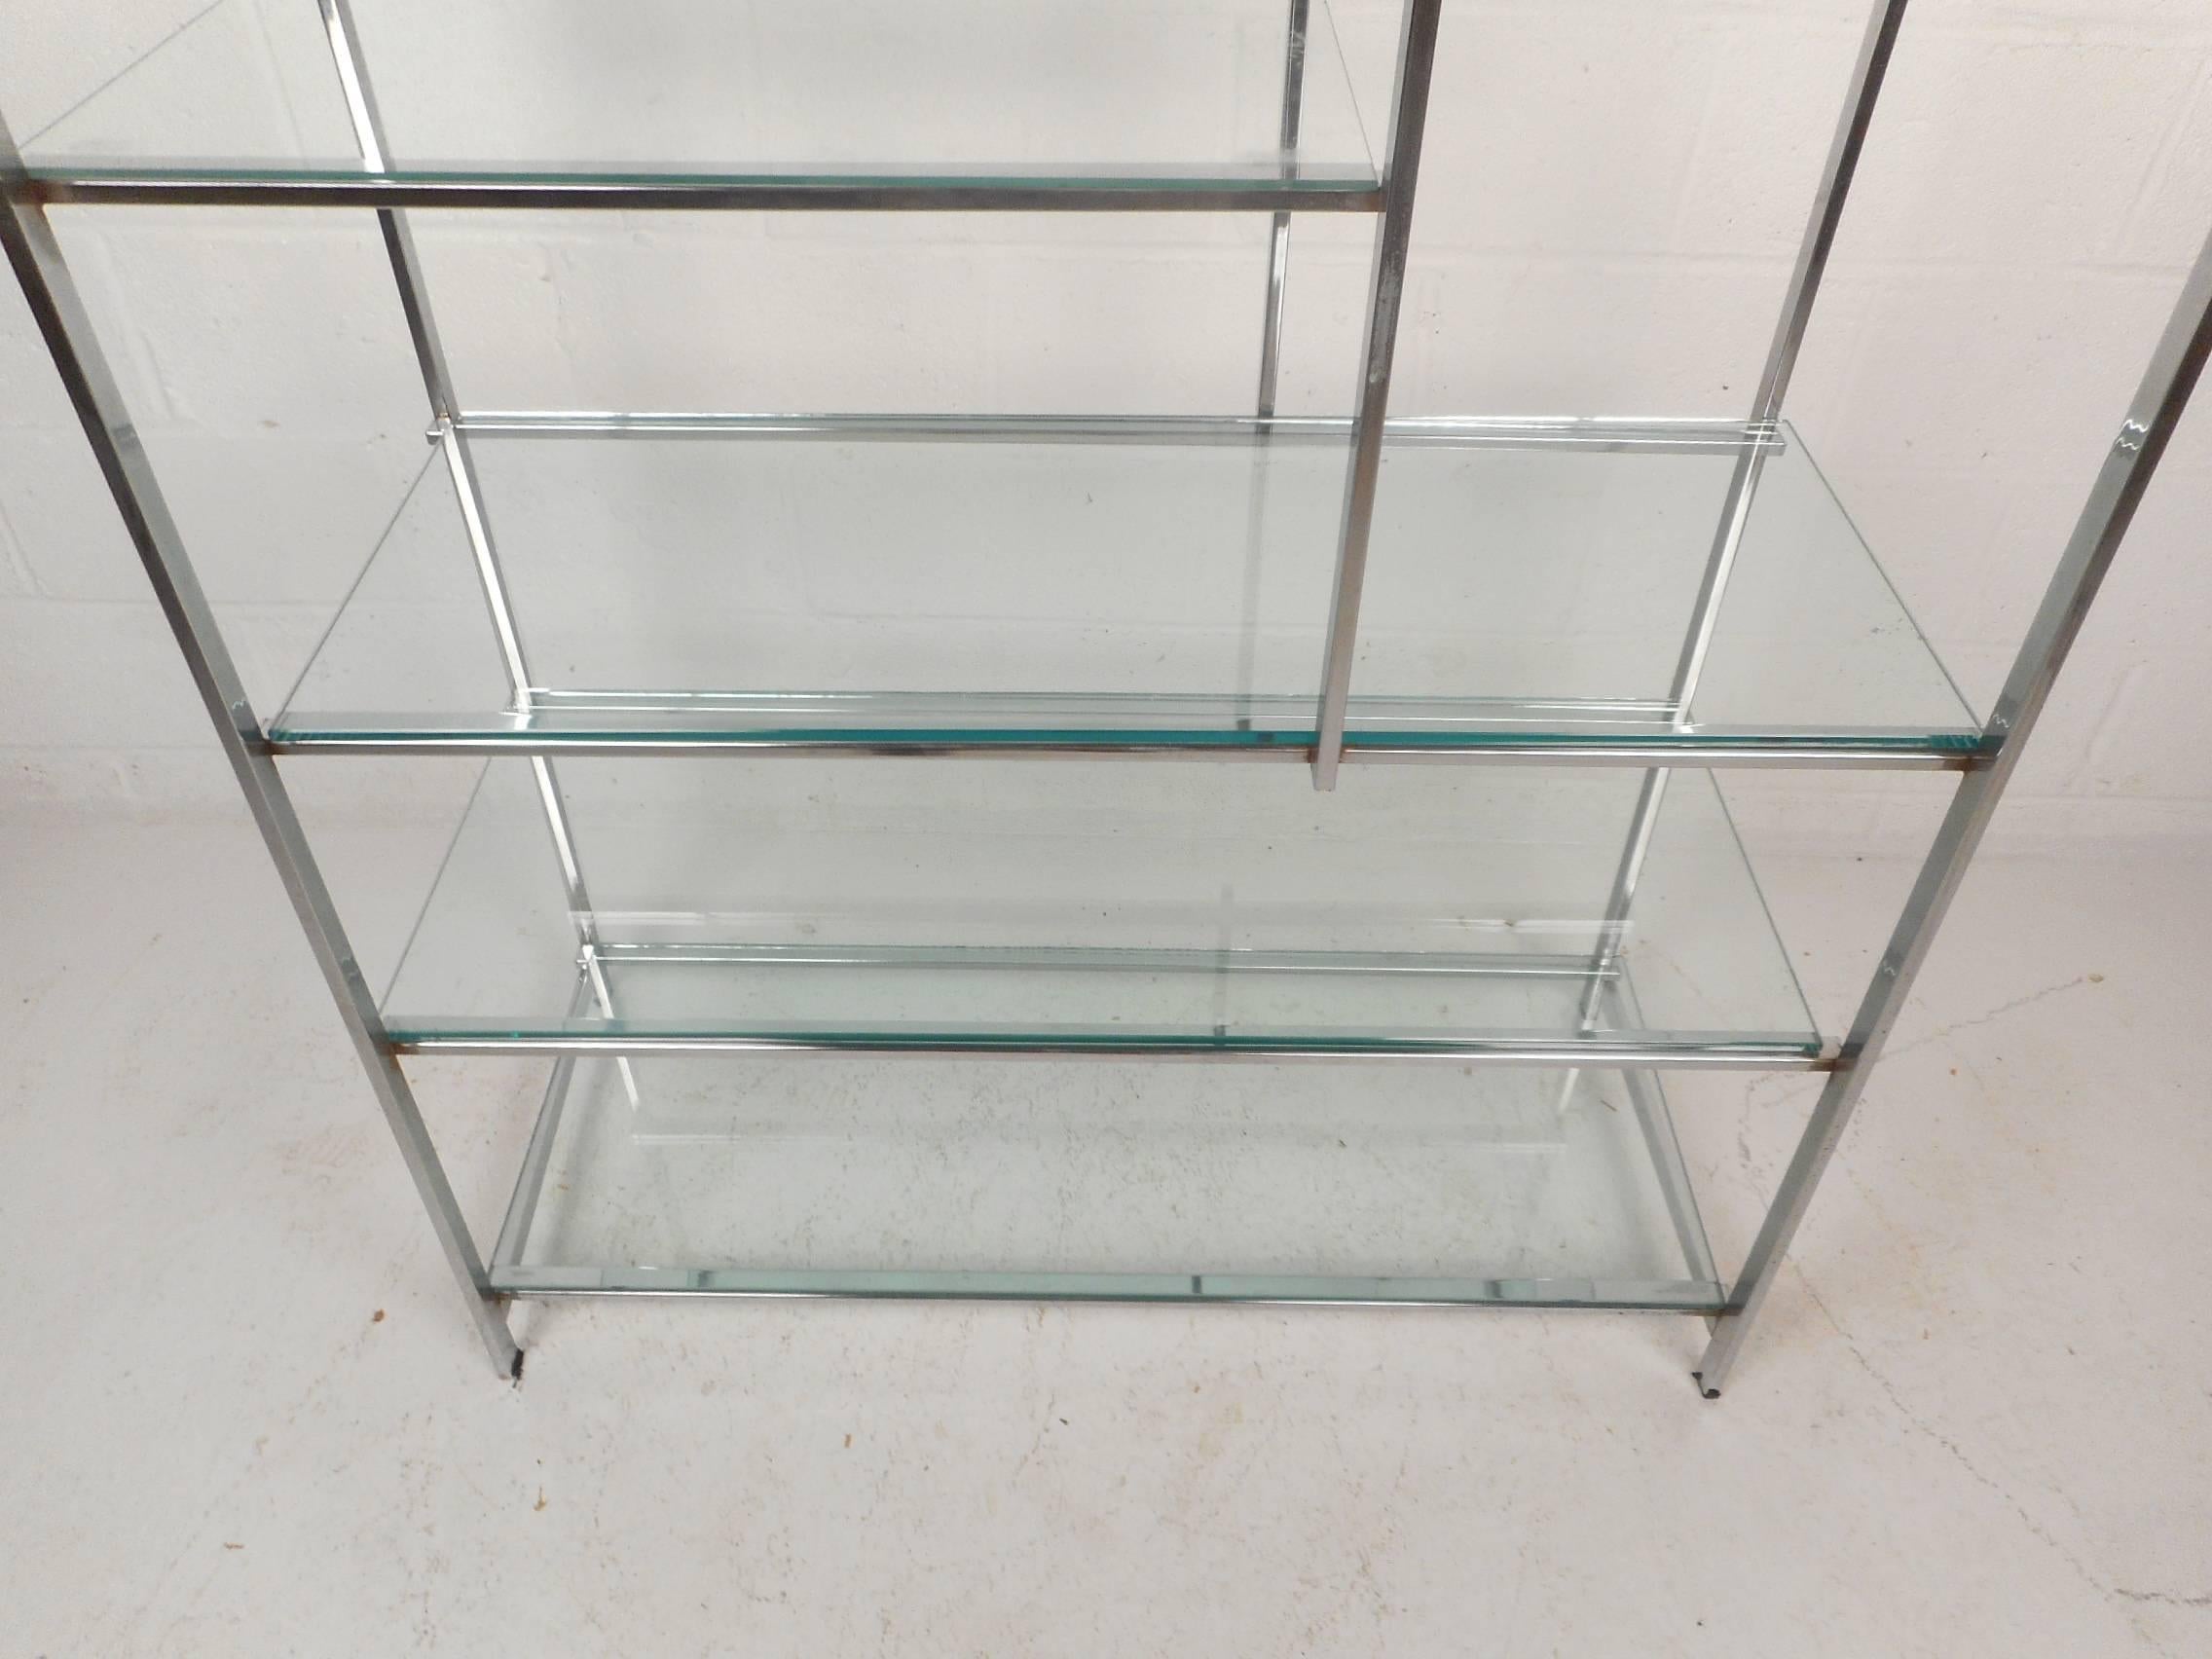 Late 20th Century Exquisite Mid-Century Modern Chrome Étagère in the Style of Milo Baughman